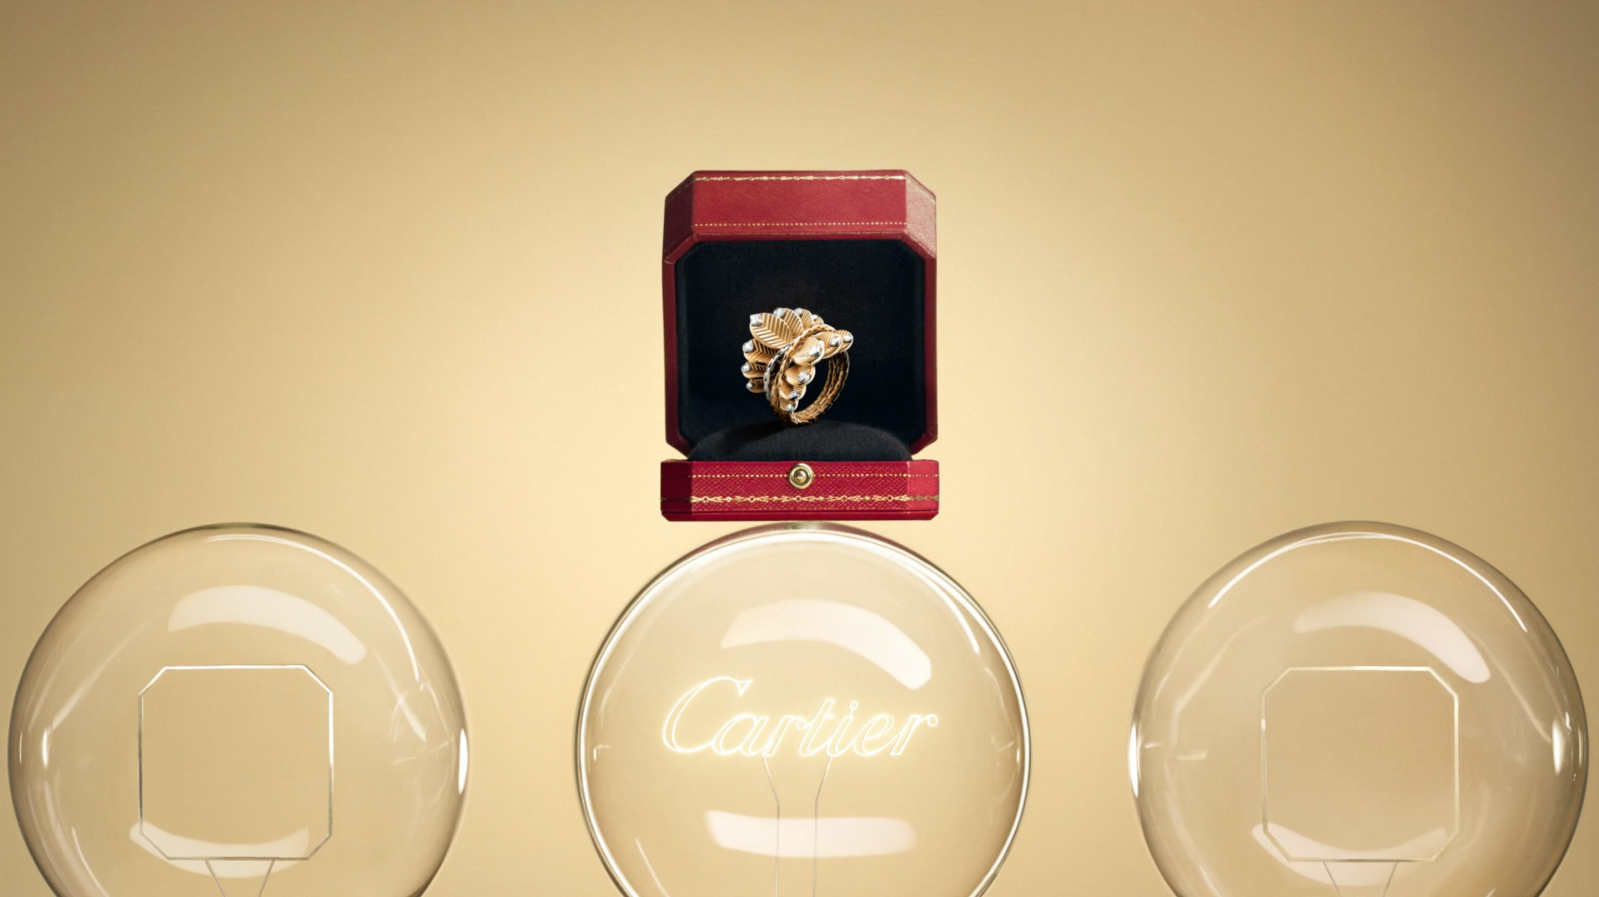 CARTIER HOLIDAYS 2022 directed by Philippe Jarrigeon